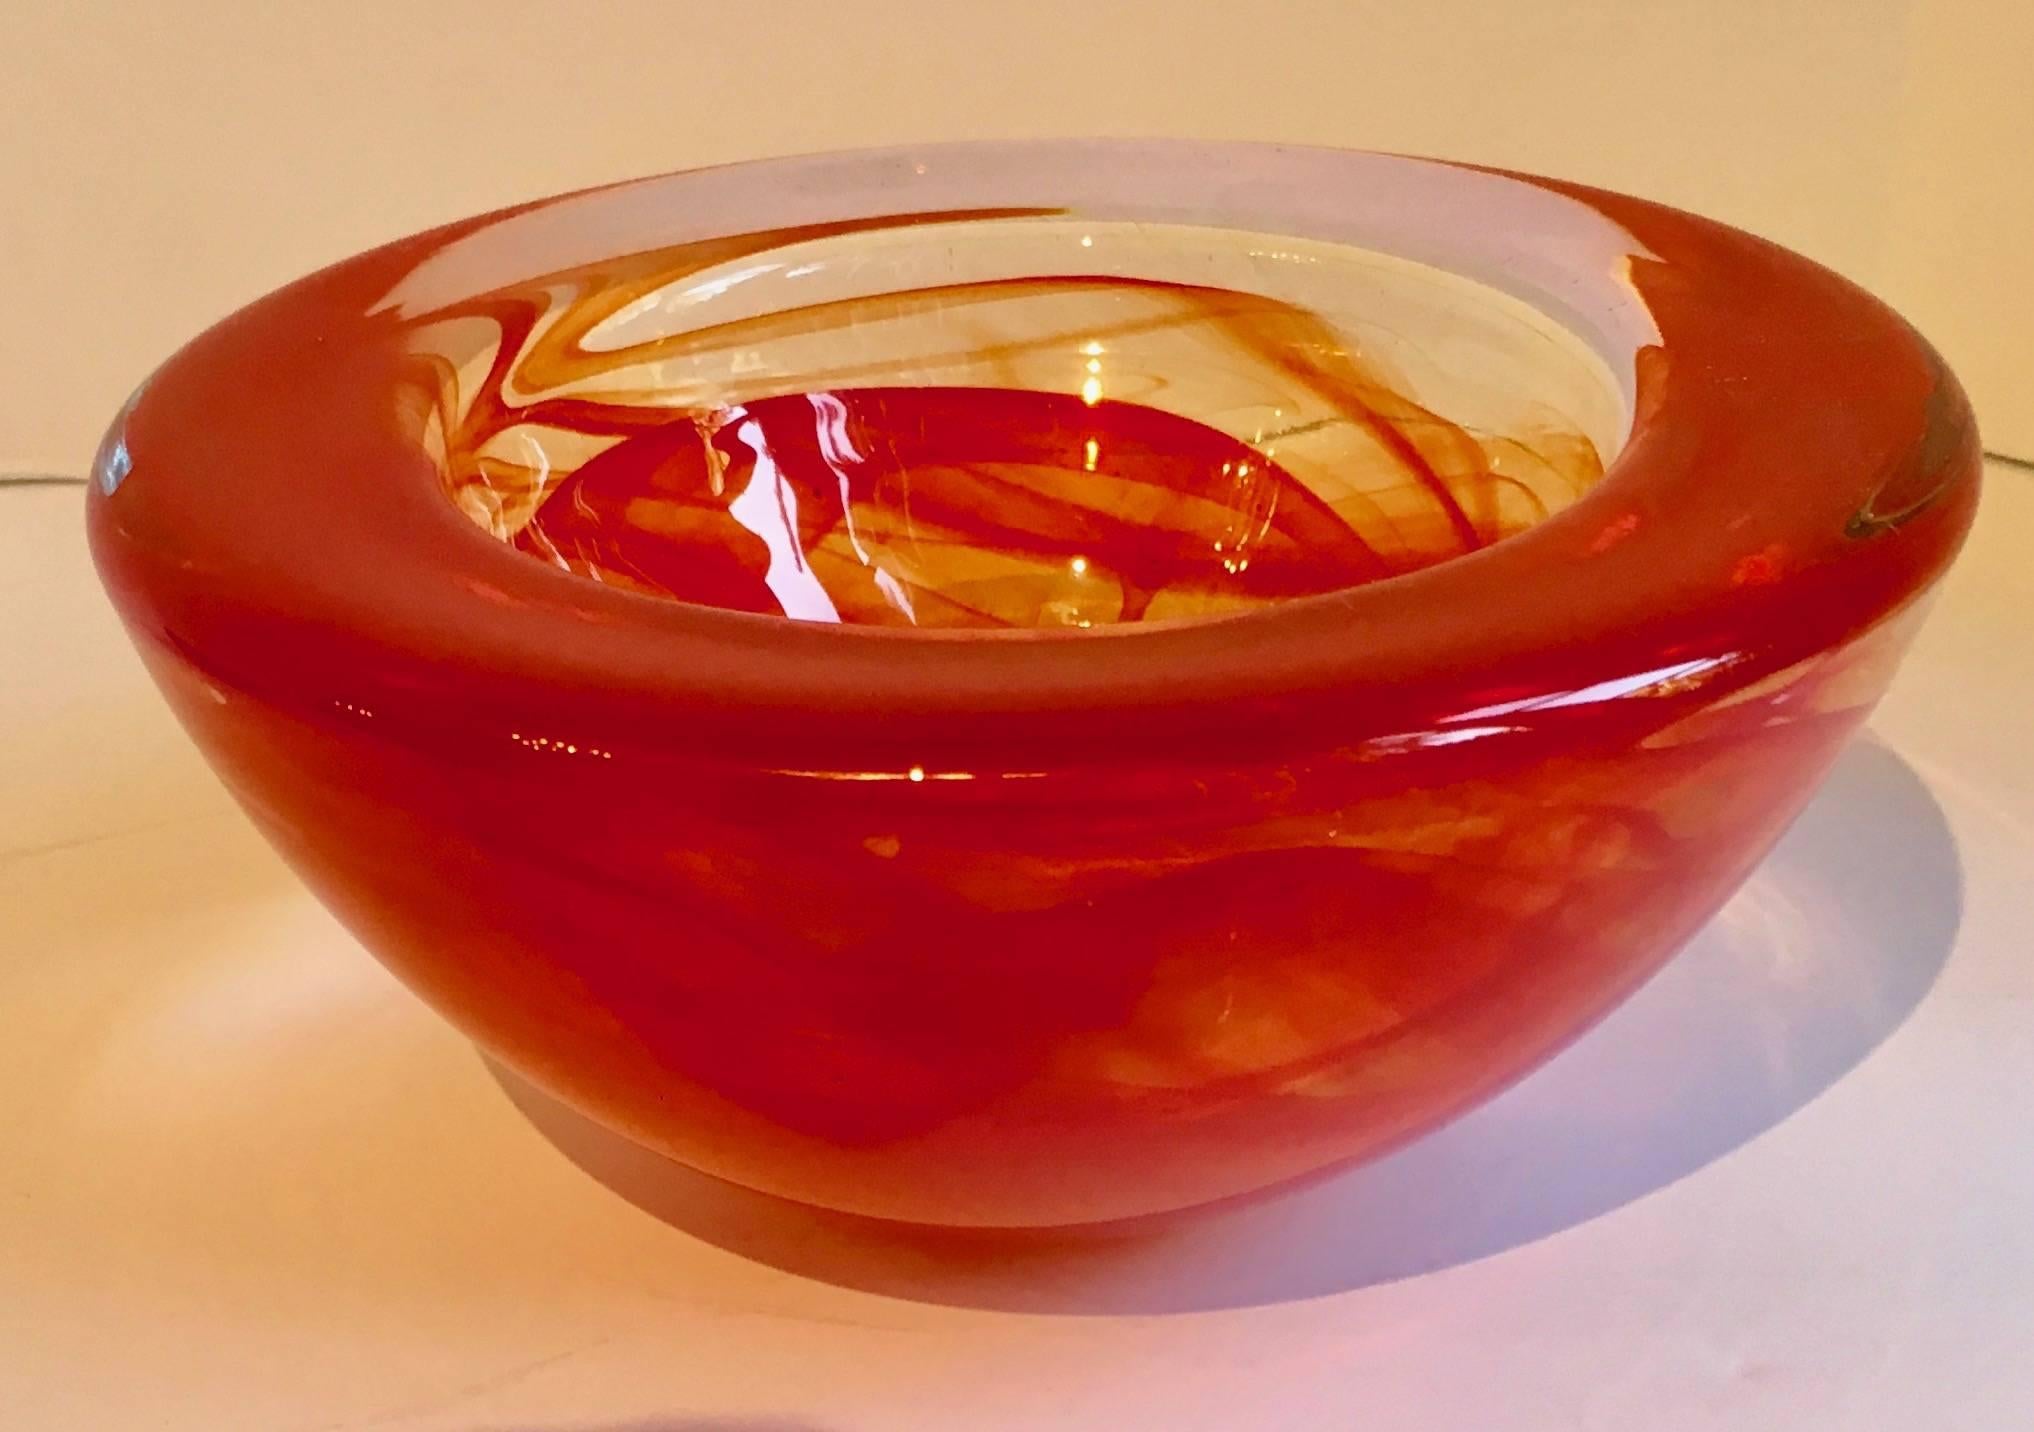 Red Kosta Boda Bowl by Anna Ehrner - a beautiful bowl (we also have the smaller companion bowl in same material) 
Great for anything, from nuts, to cotton balls to paper clips - a great piece for the desk or vanity or bar.